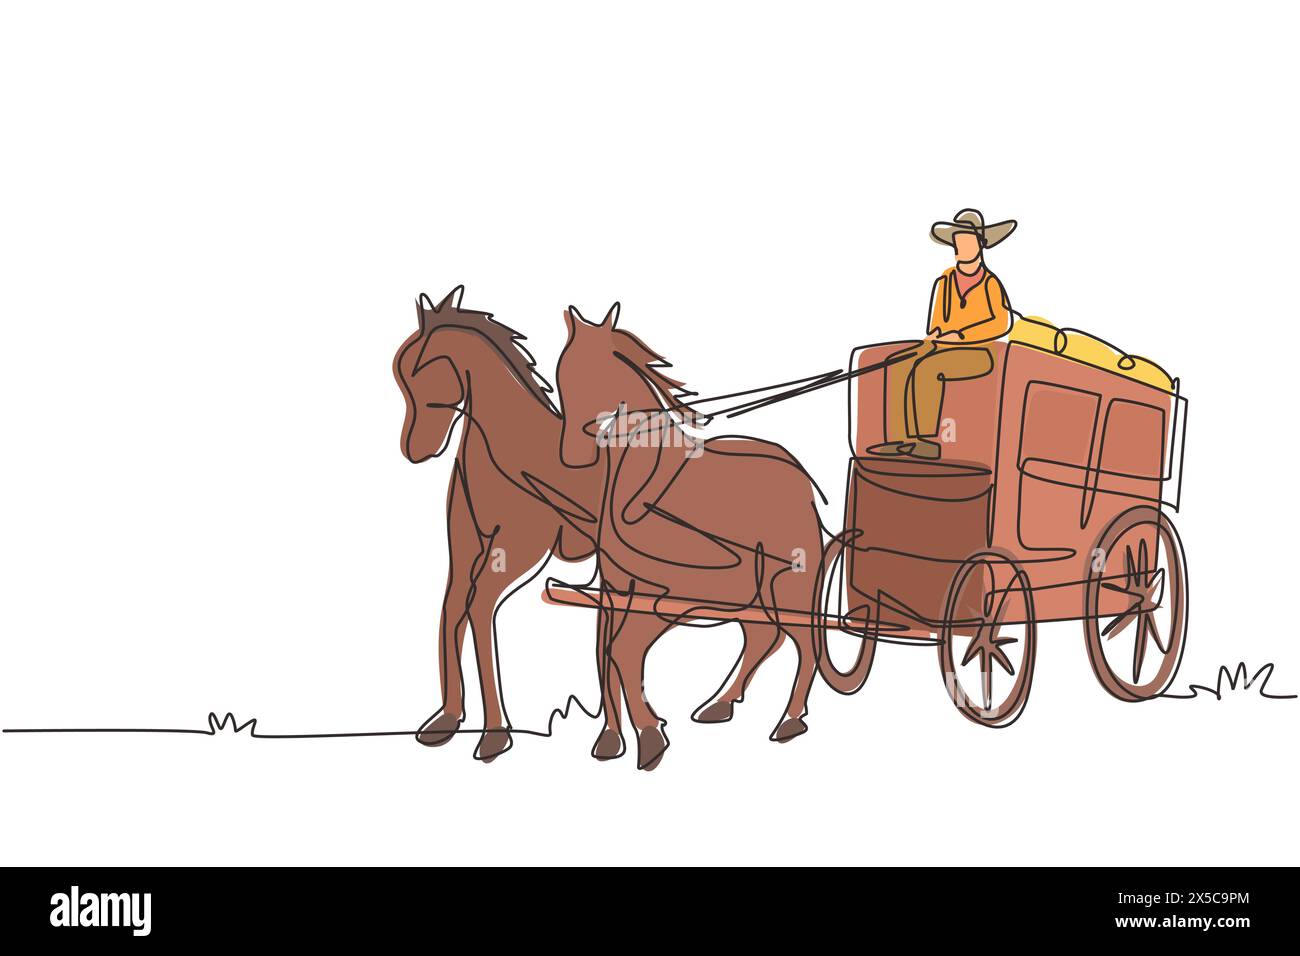 Continuous one line drawing old wild west horse-drawn carriage with coach. Vintage Western Stagecoach with horses. Wild west covered wagons in desert. Stock Vector